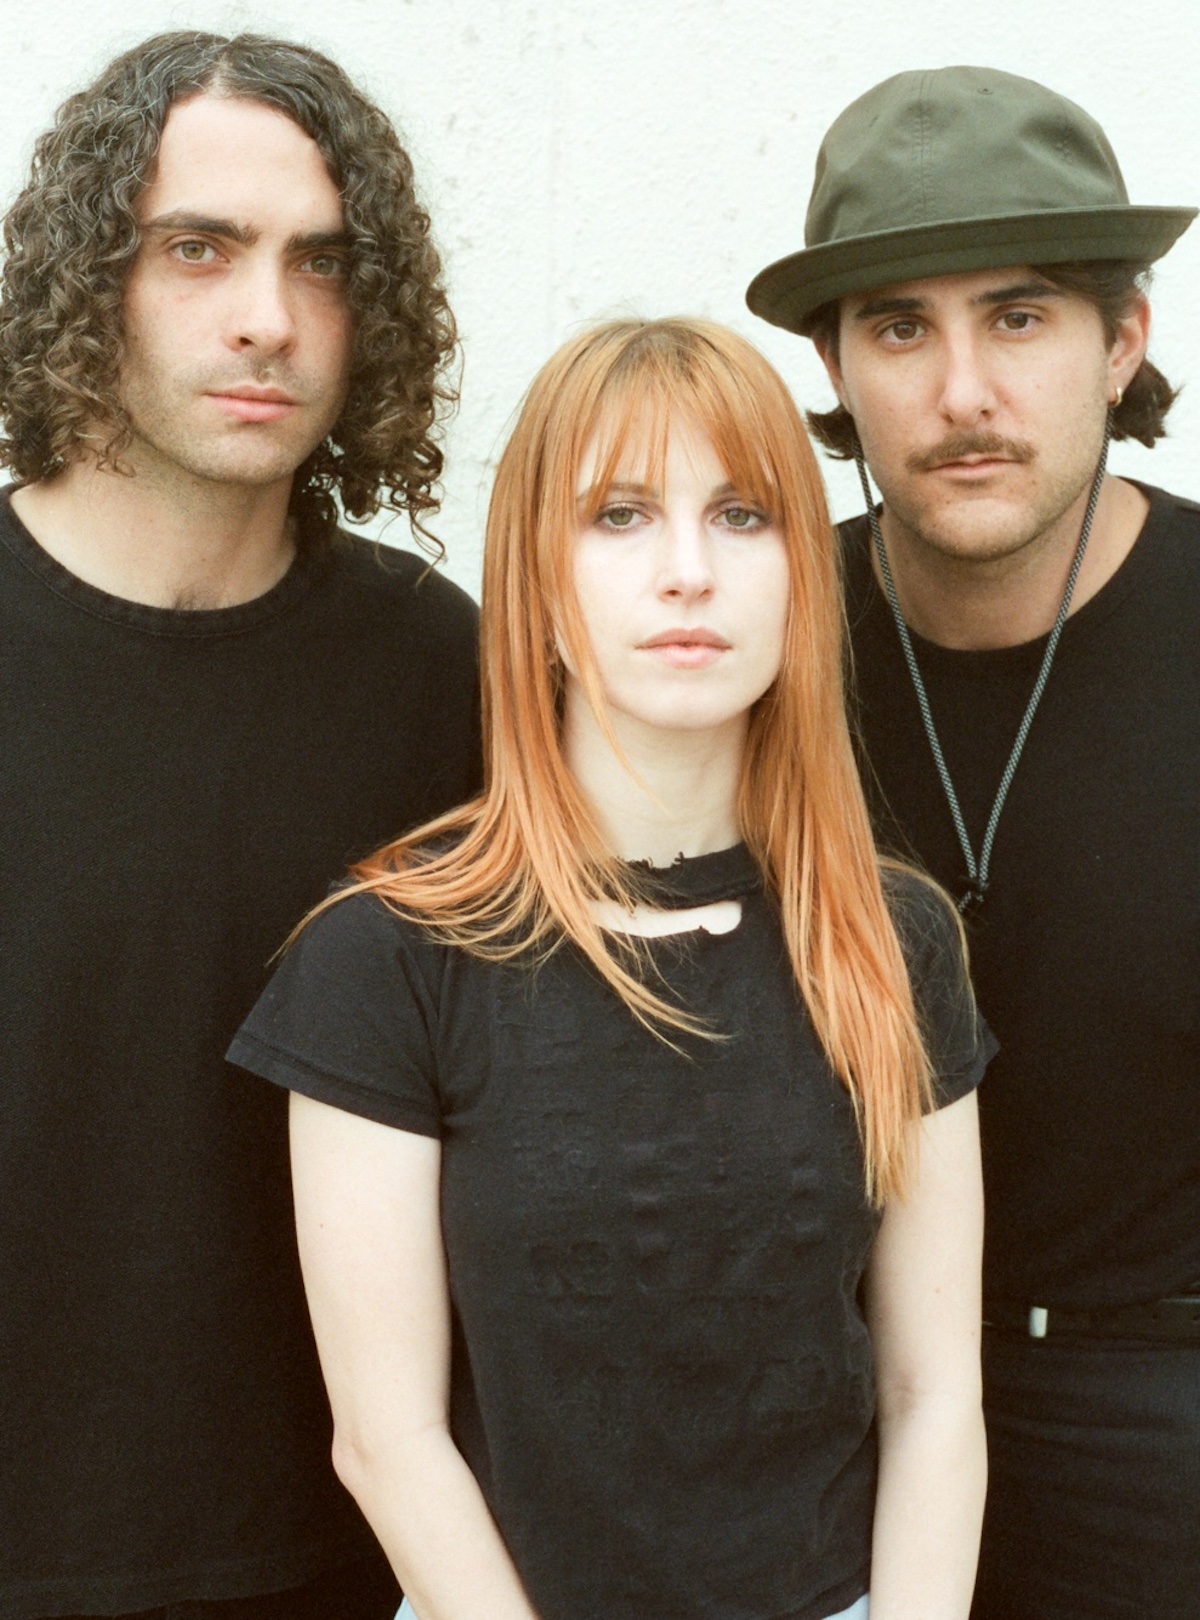 Paramore debut new song “Running Out Of Time” in Nashville